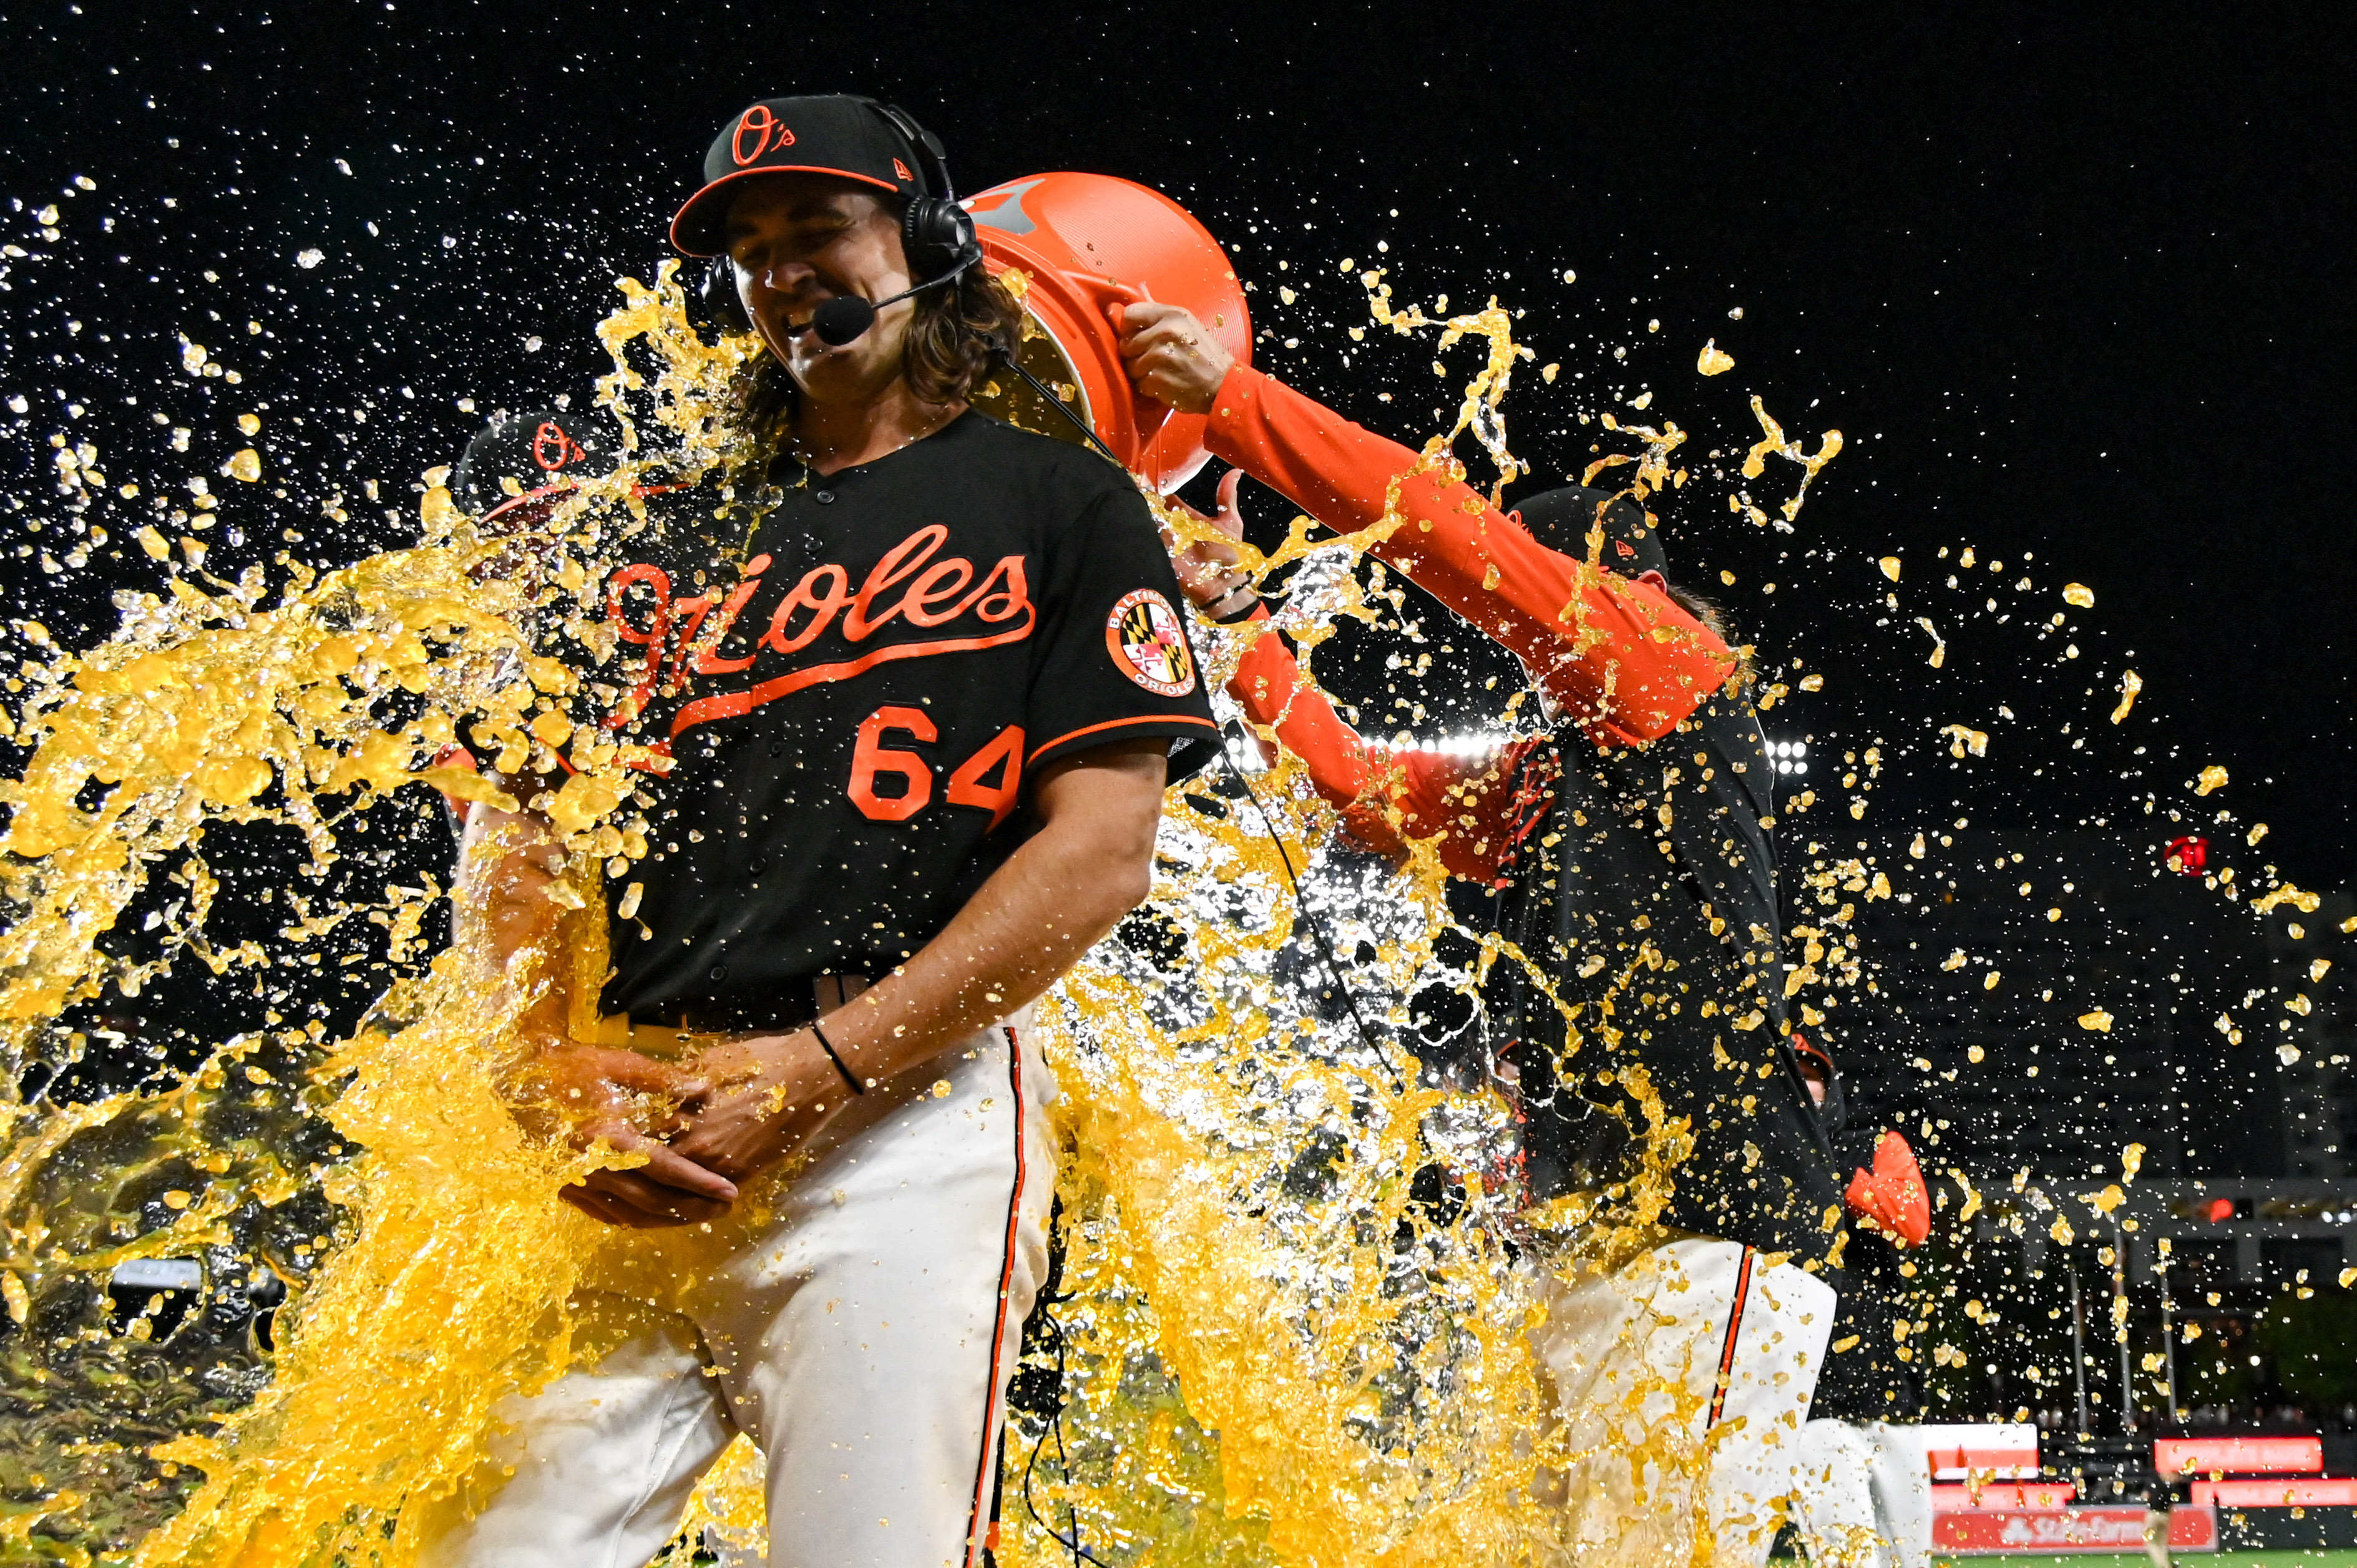 Orioles pitcher Dean Kremer is doused in Gatorade following win over Astros